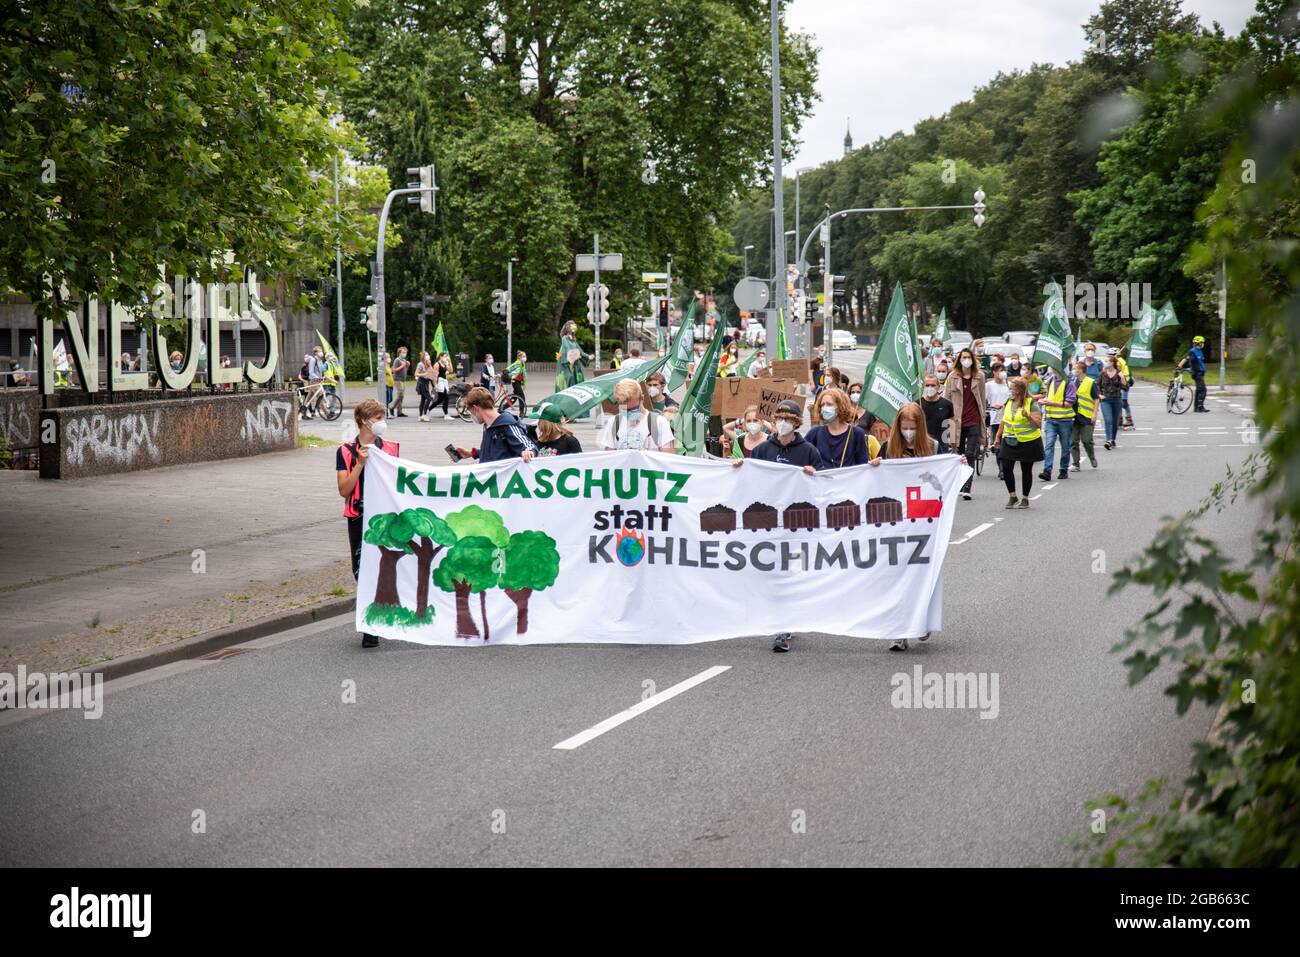 07.23.20201 About 100 People Demonstrate With Fridays For Future For More Climate Protection And Mobility Change. Stock Photo